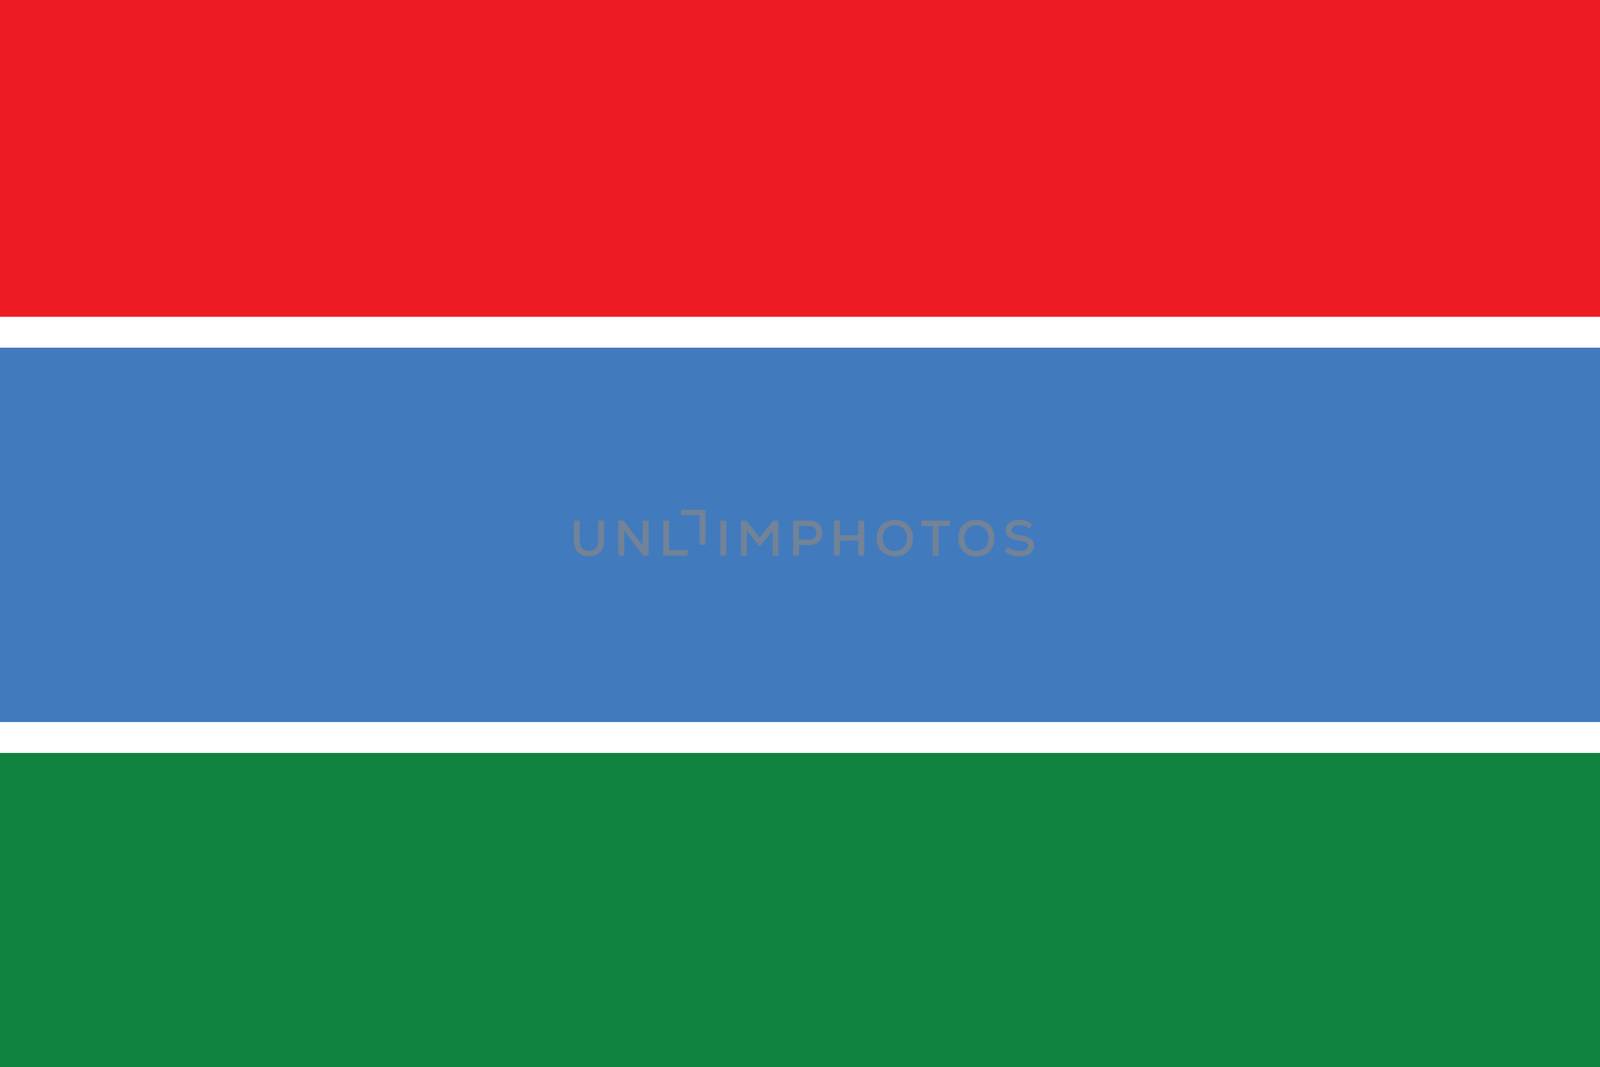 An Illustrated Drawing of the flag of Gambia